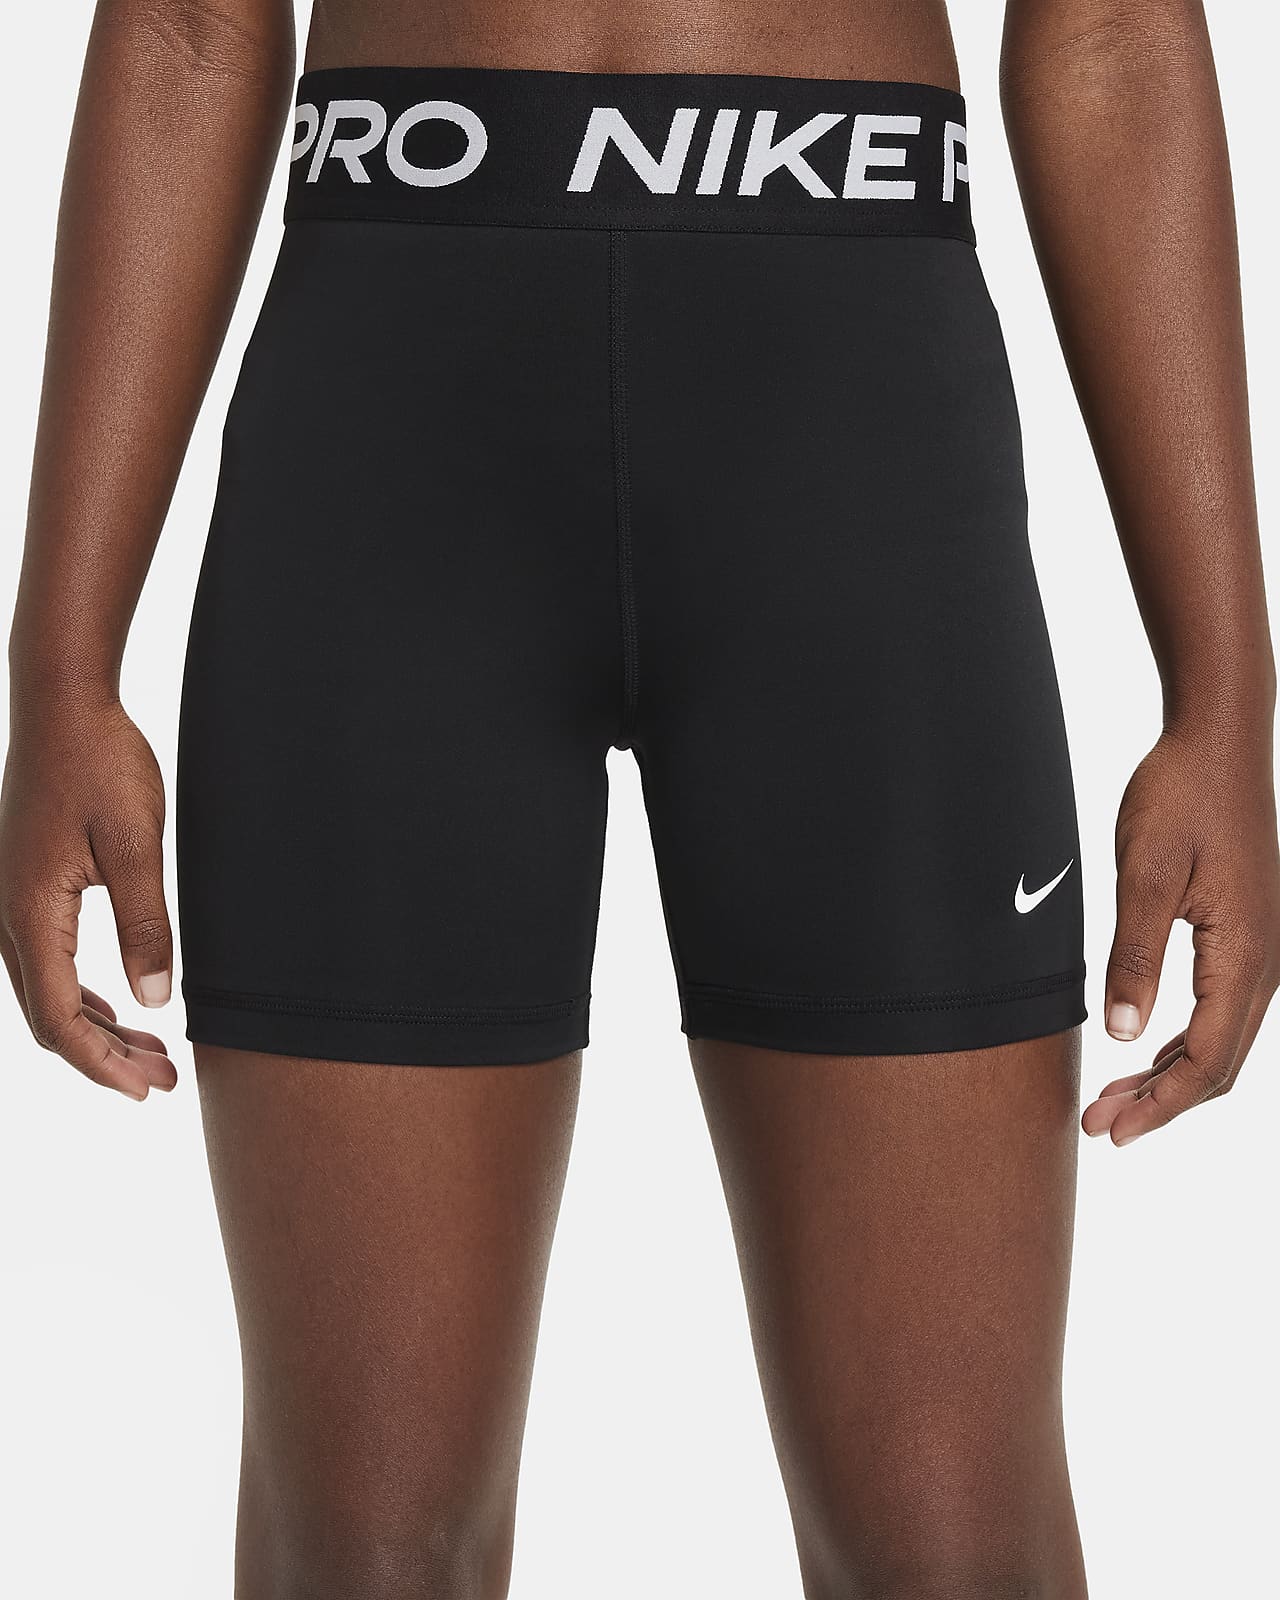 what to wear under nike pro shorts